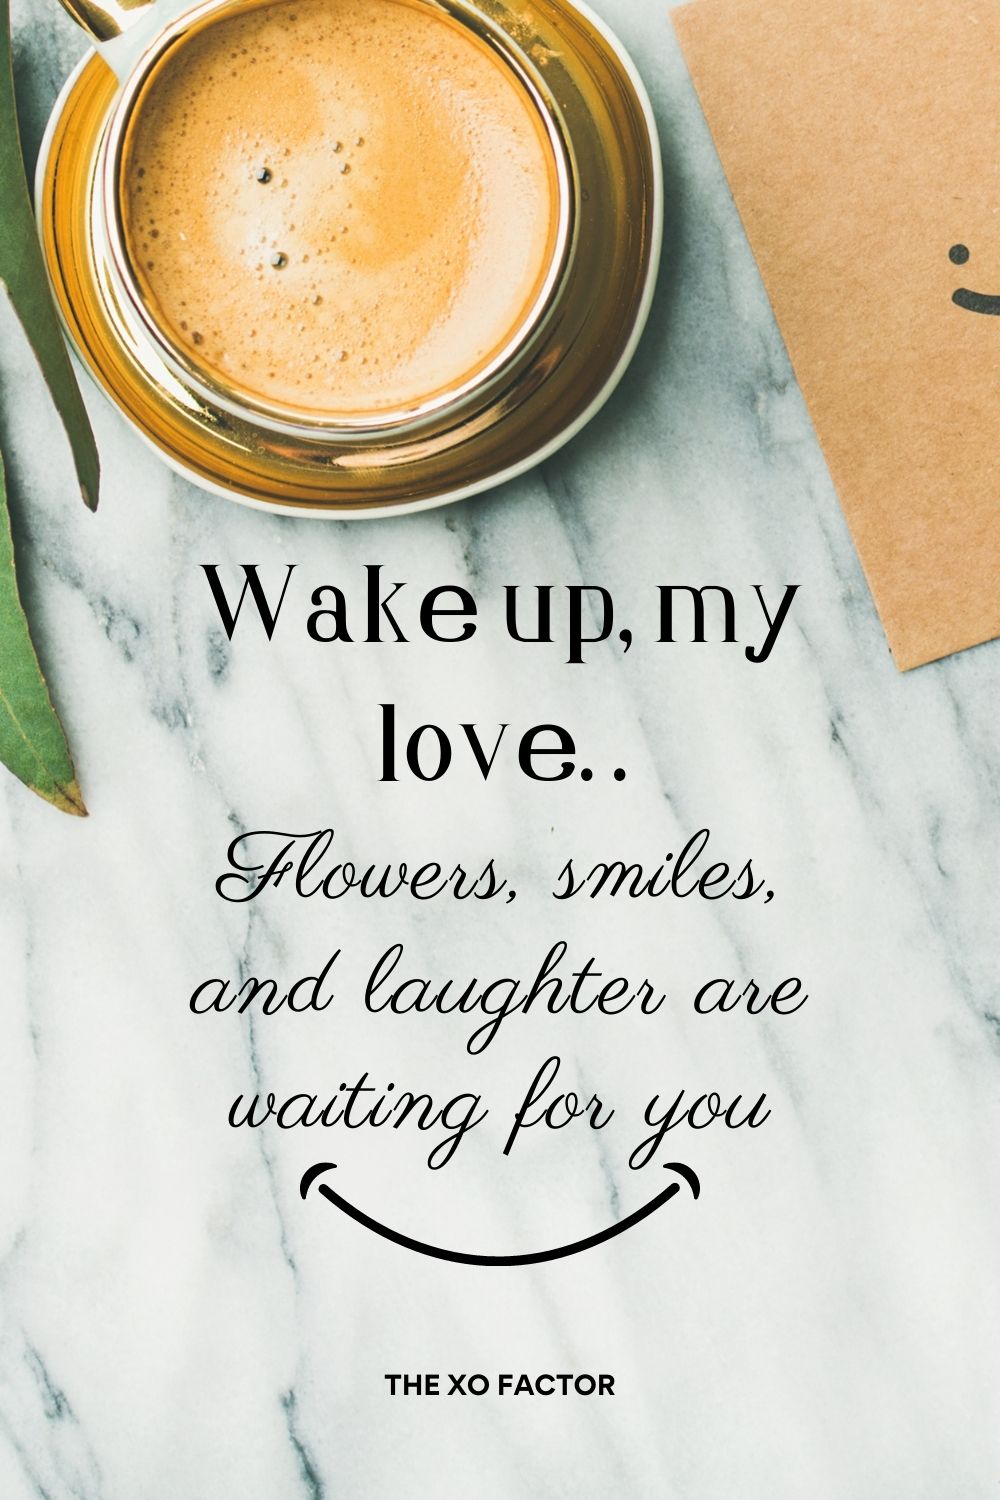 Wake up, my love. Flowers, smiles, and laughter are waiting for you.